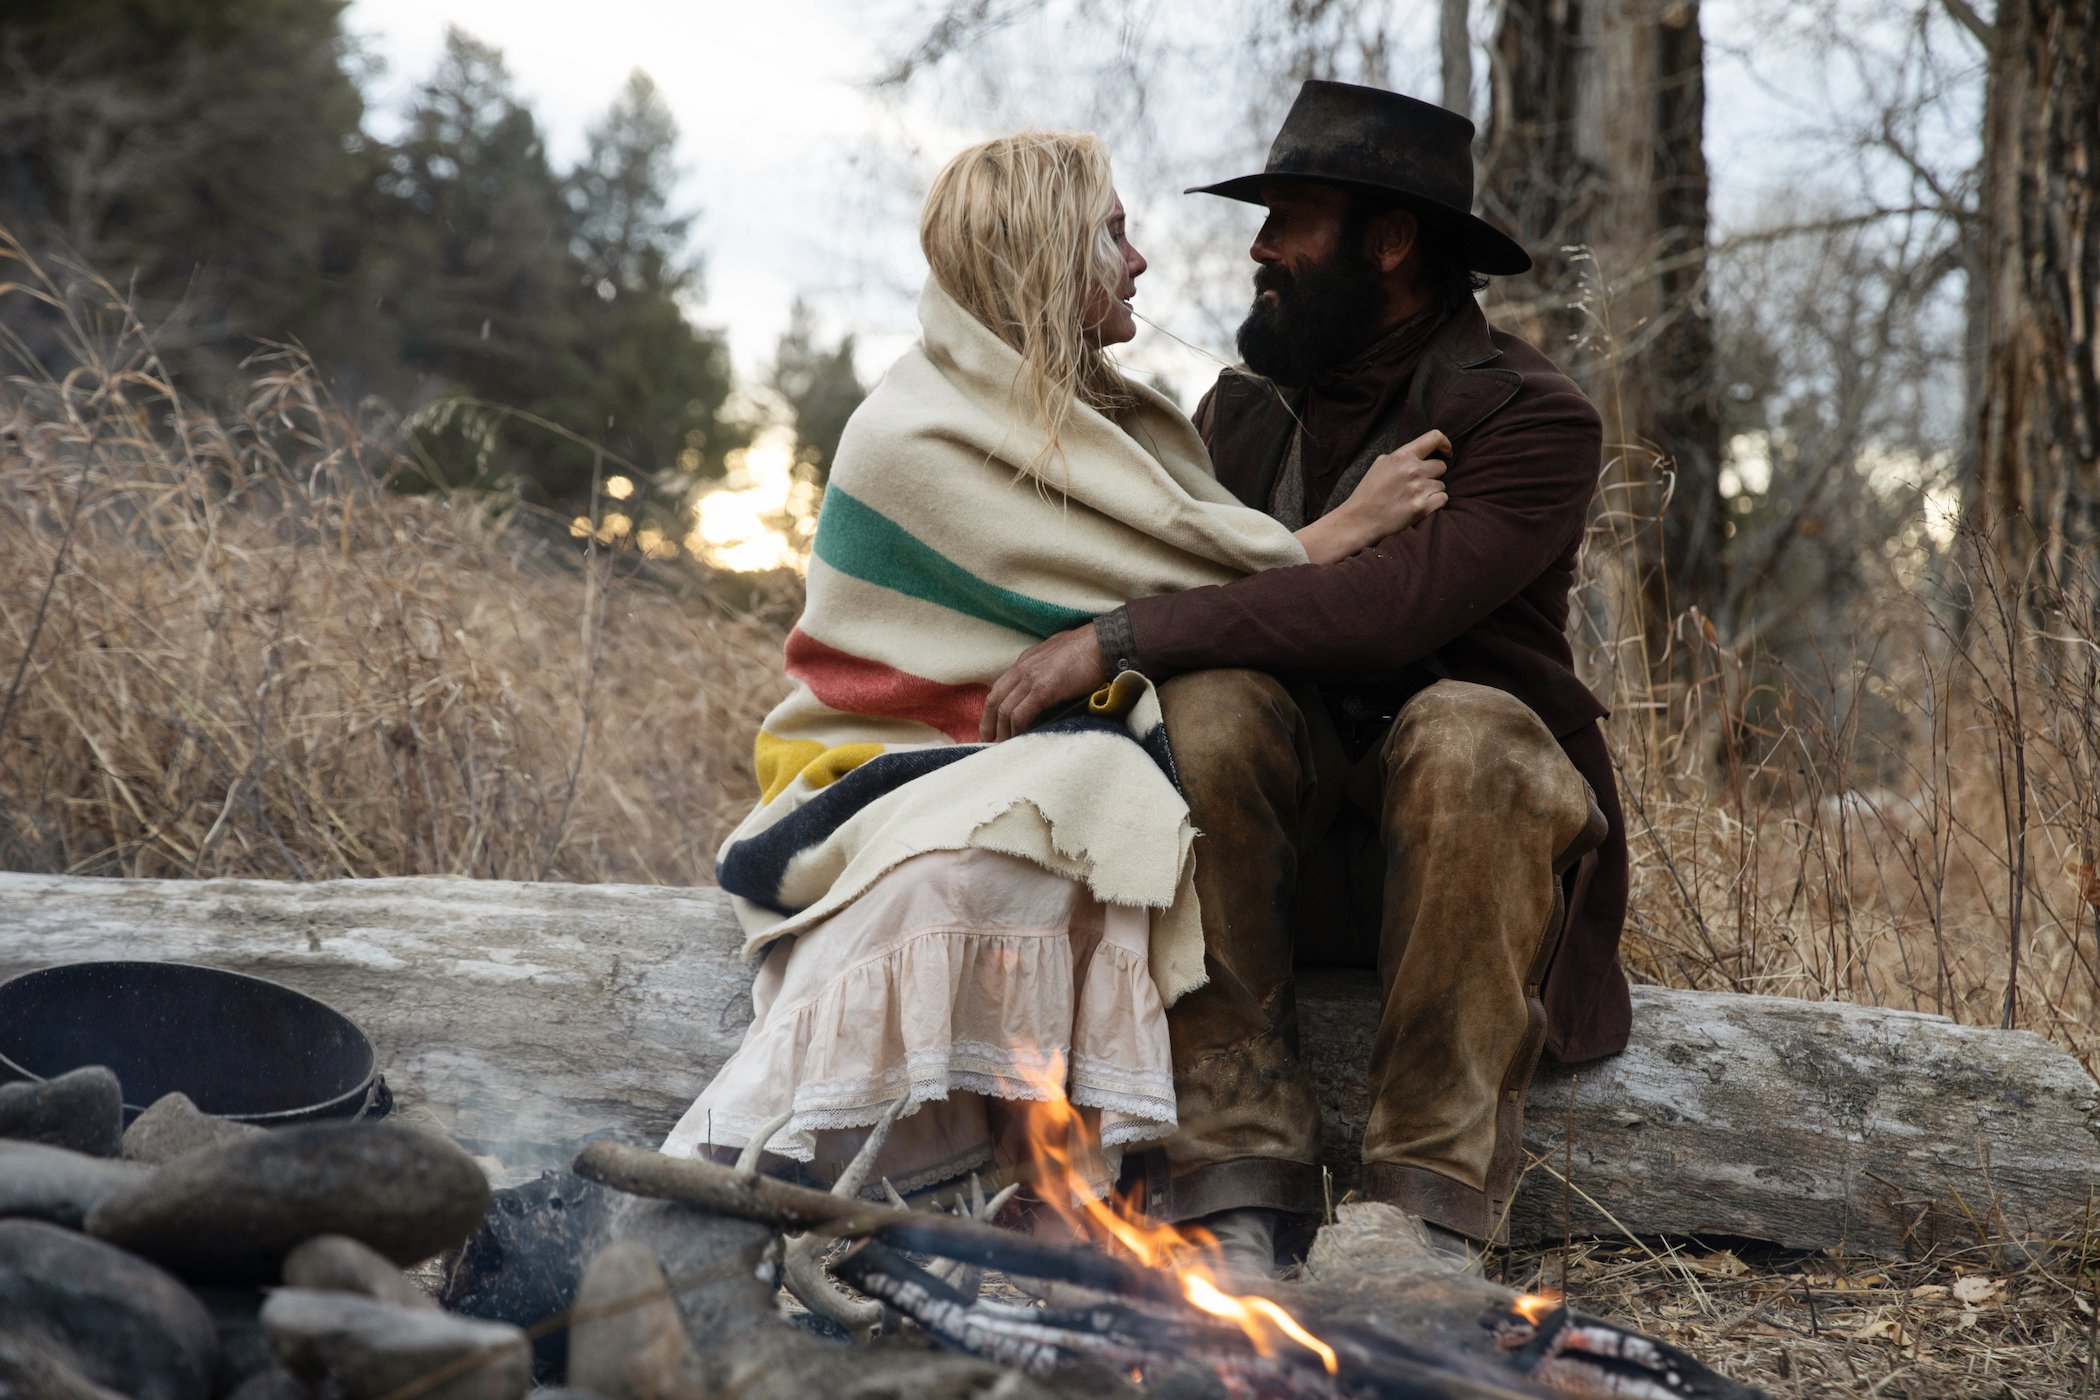 Isabel May as Elsa Dutton and Tim McGraw as James Dutton hugging each other while sitting on a log in '1883' episode 10